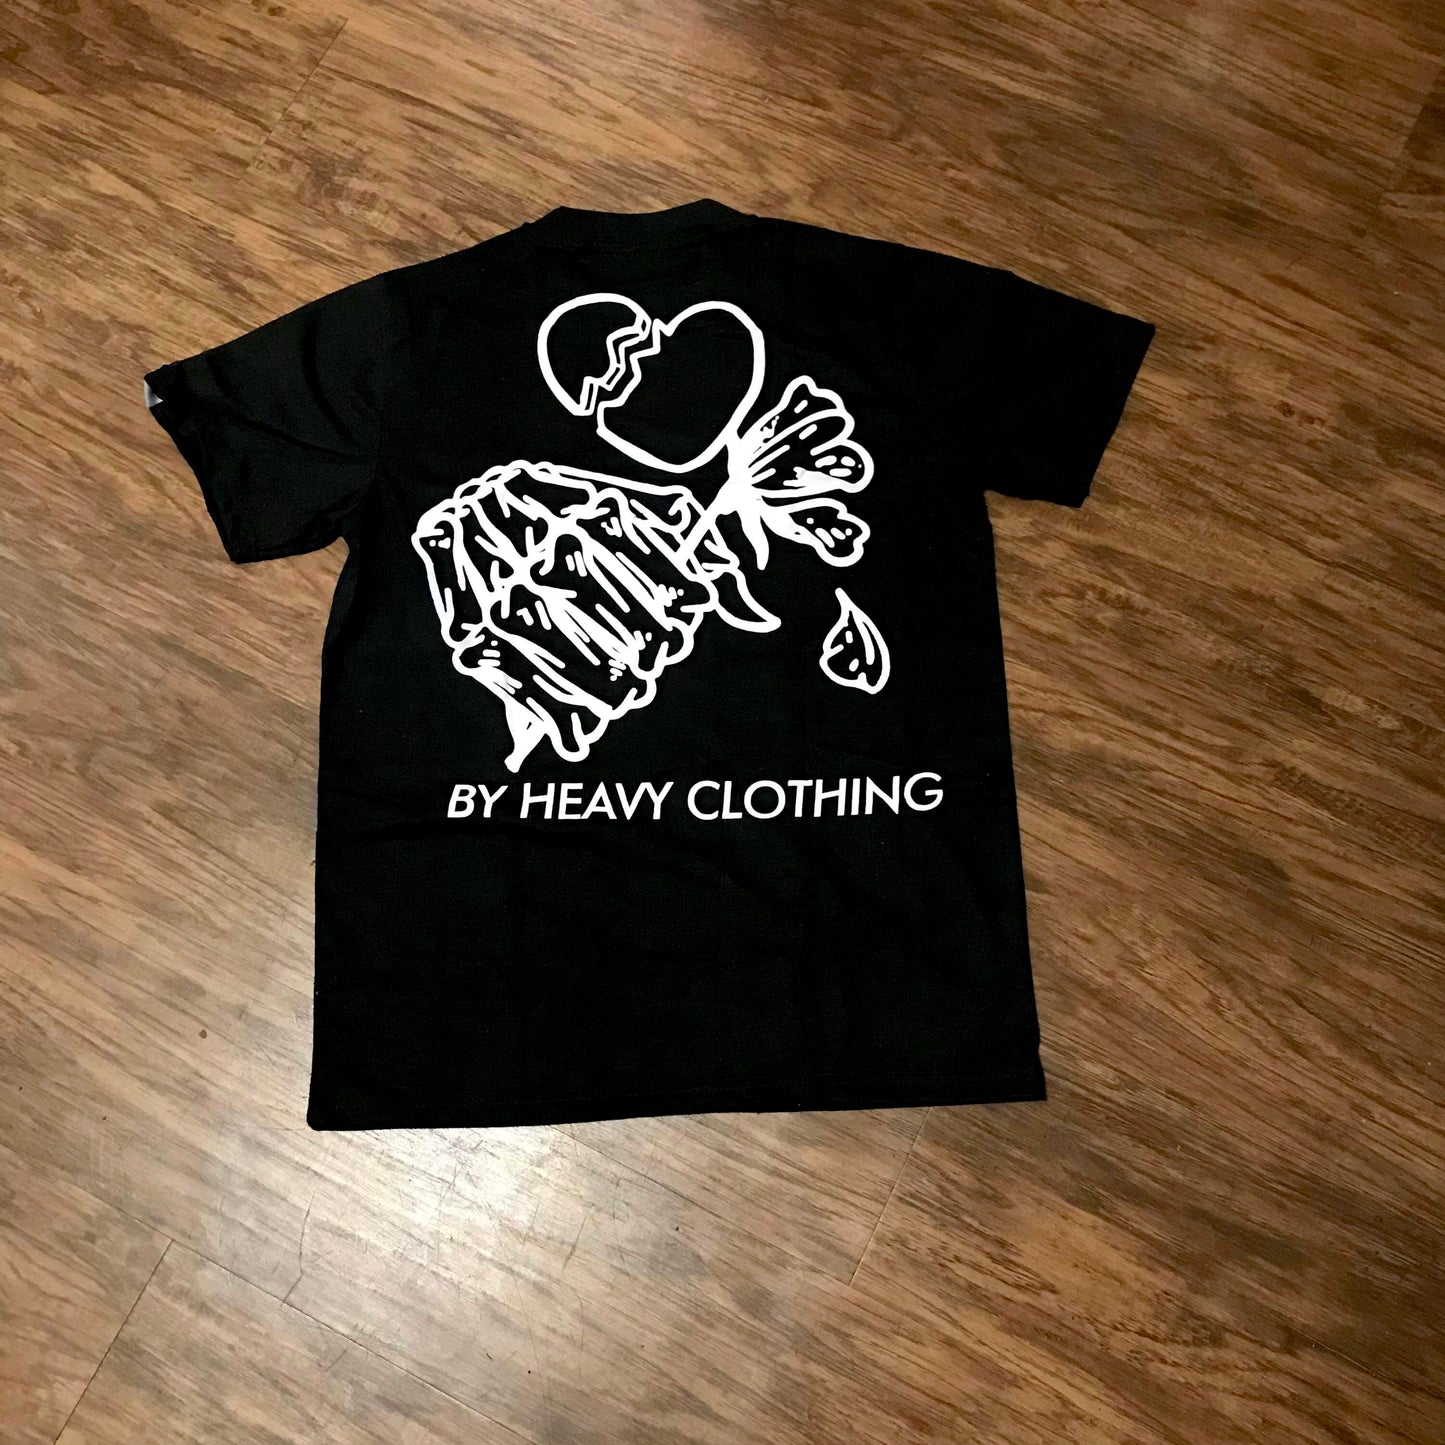 (By Heavy Clothing T Shirt)